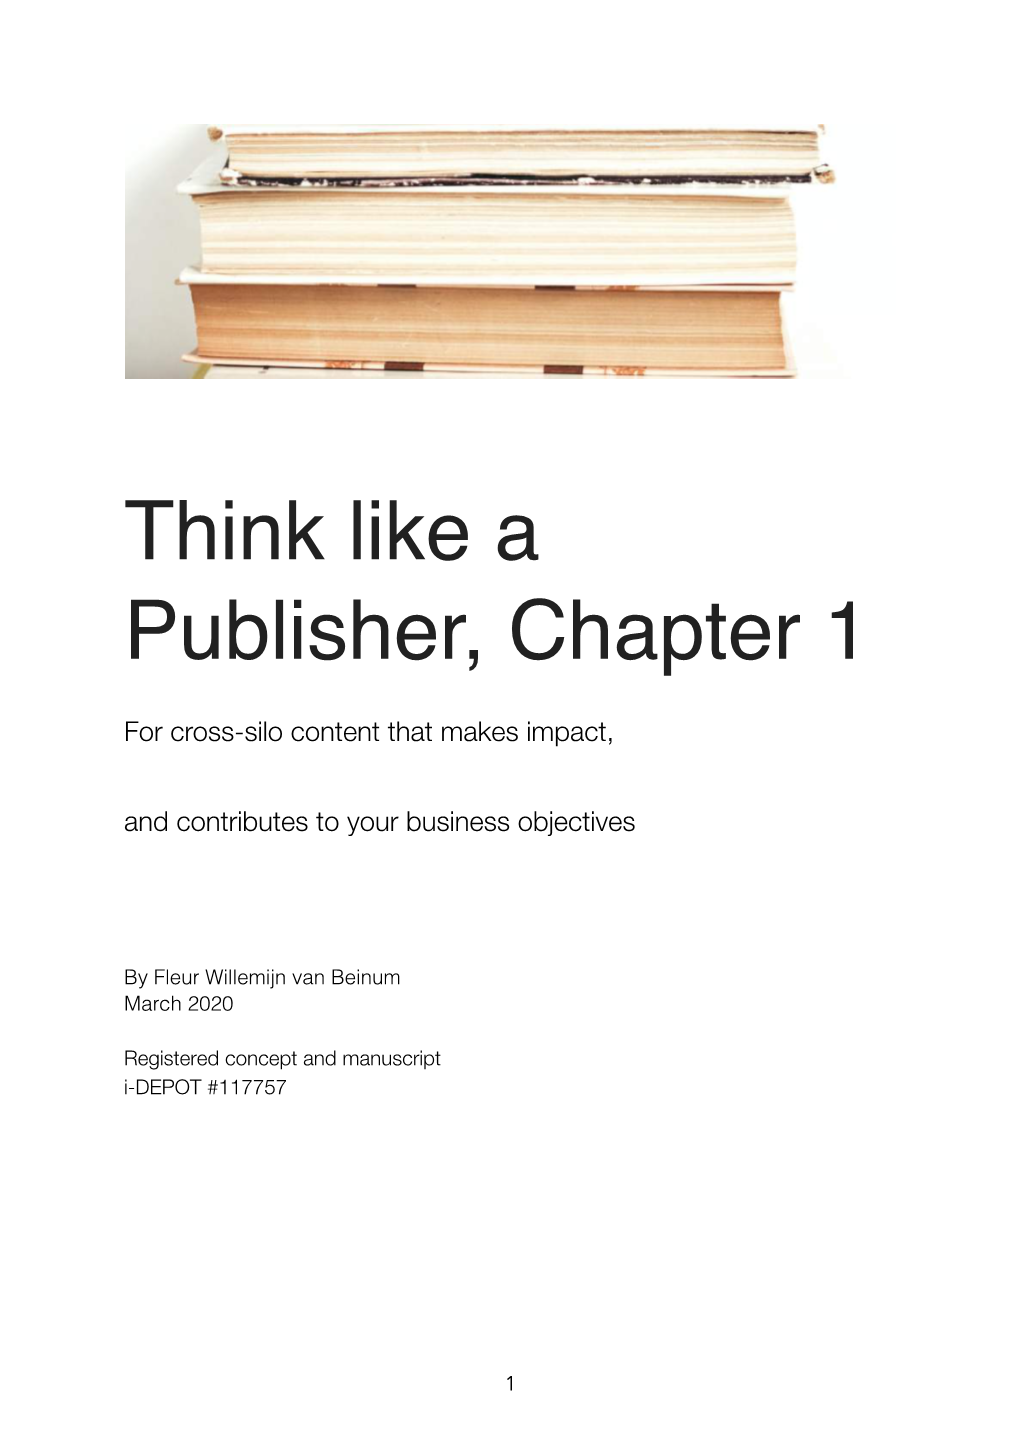 Think Like a Publisher, Chapter 1